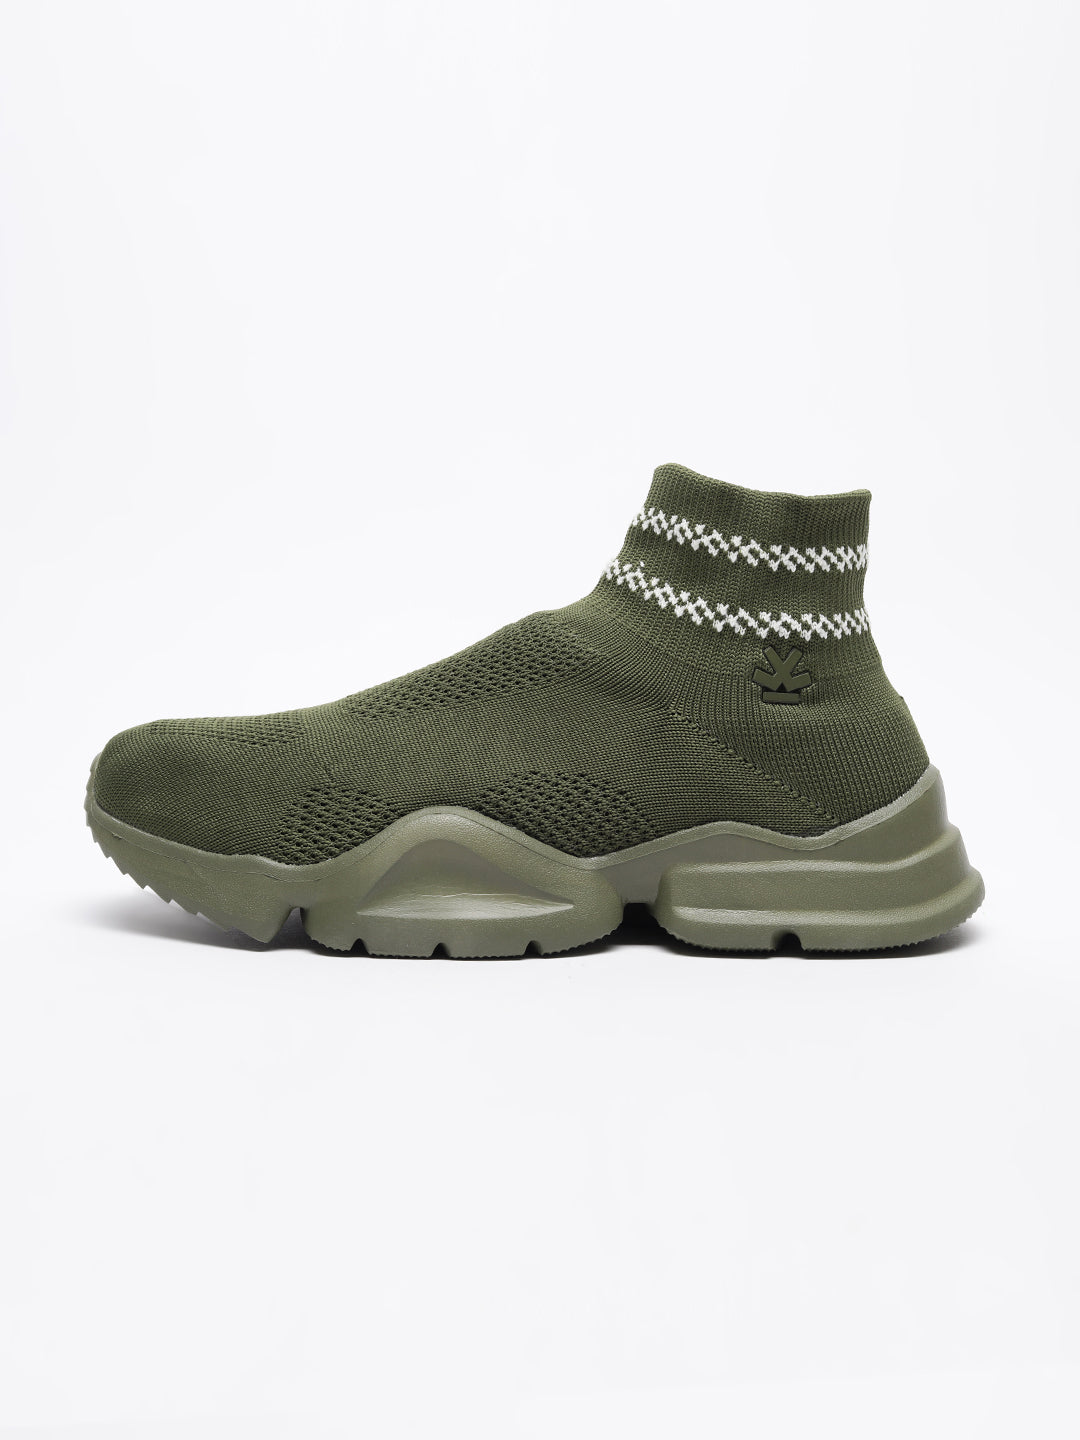 Olive Athleisure Shoes